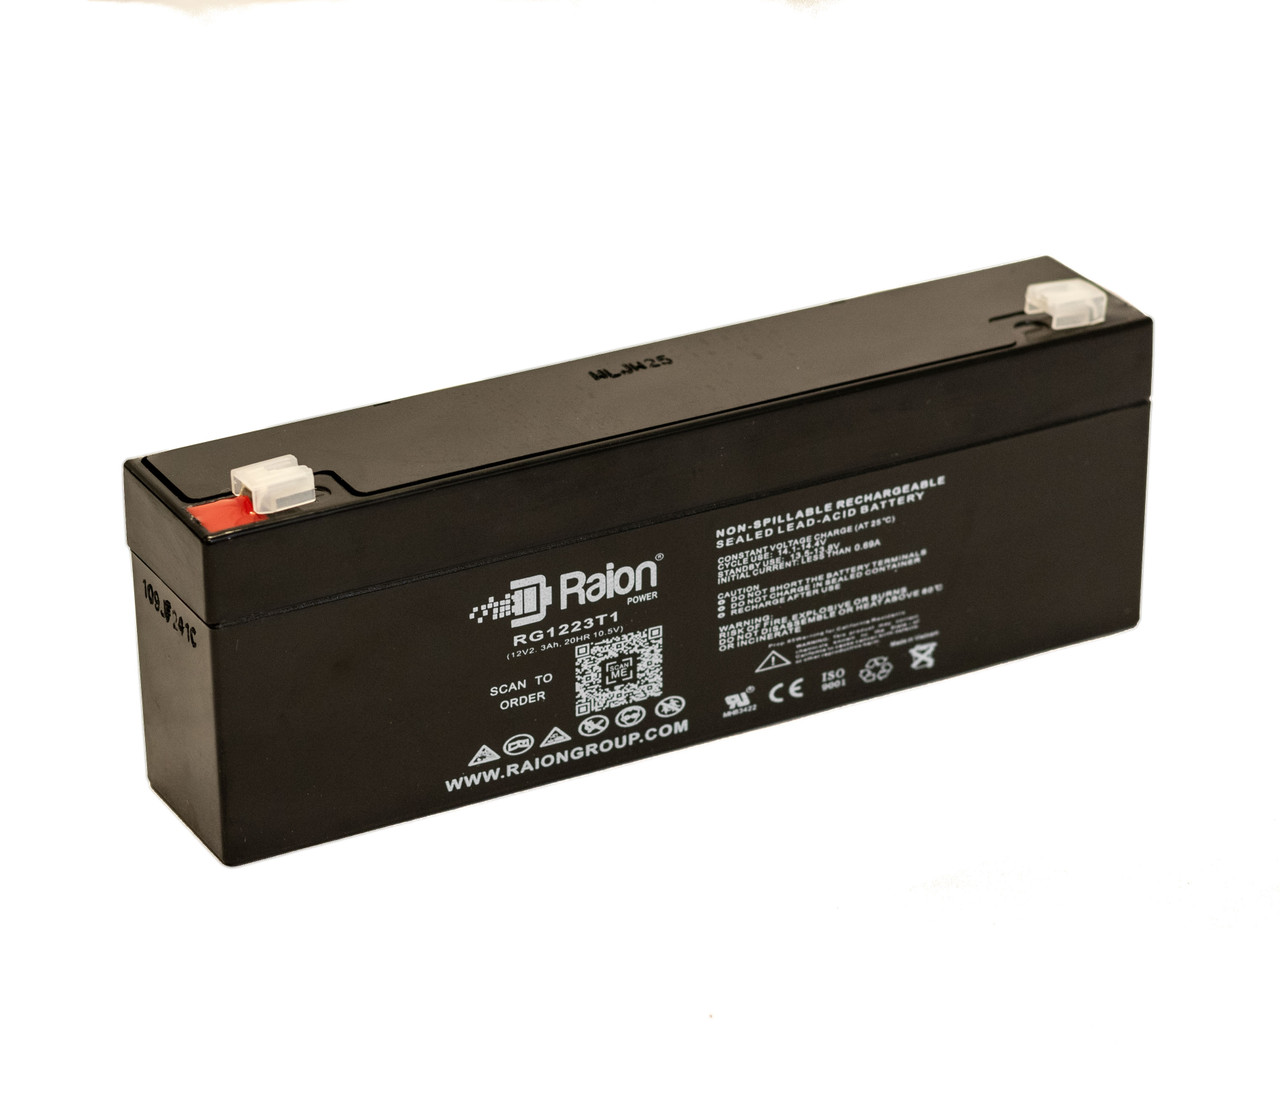 Raion Power RG1223T1 Replacement Battery for Zeus PC2.2-12